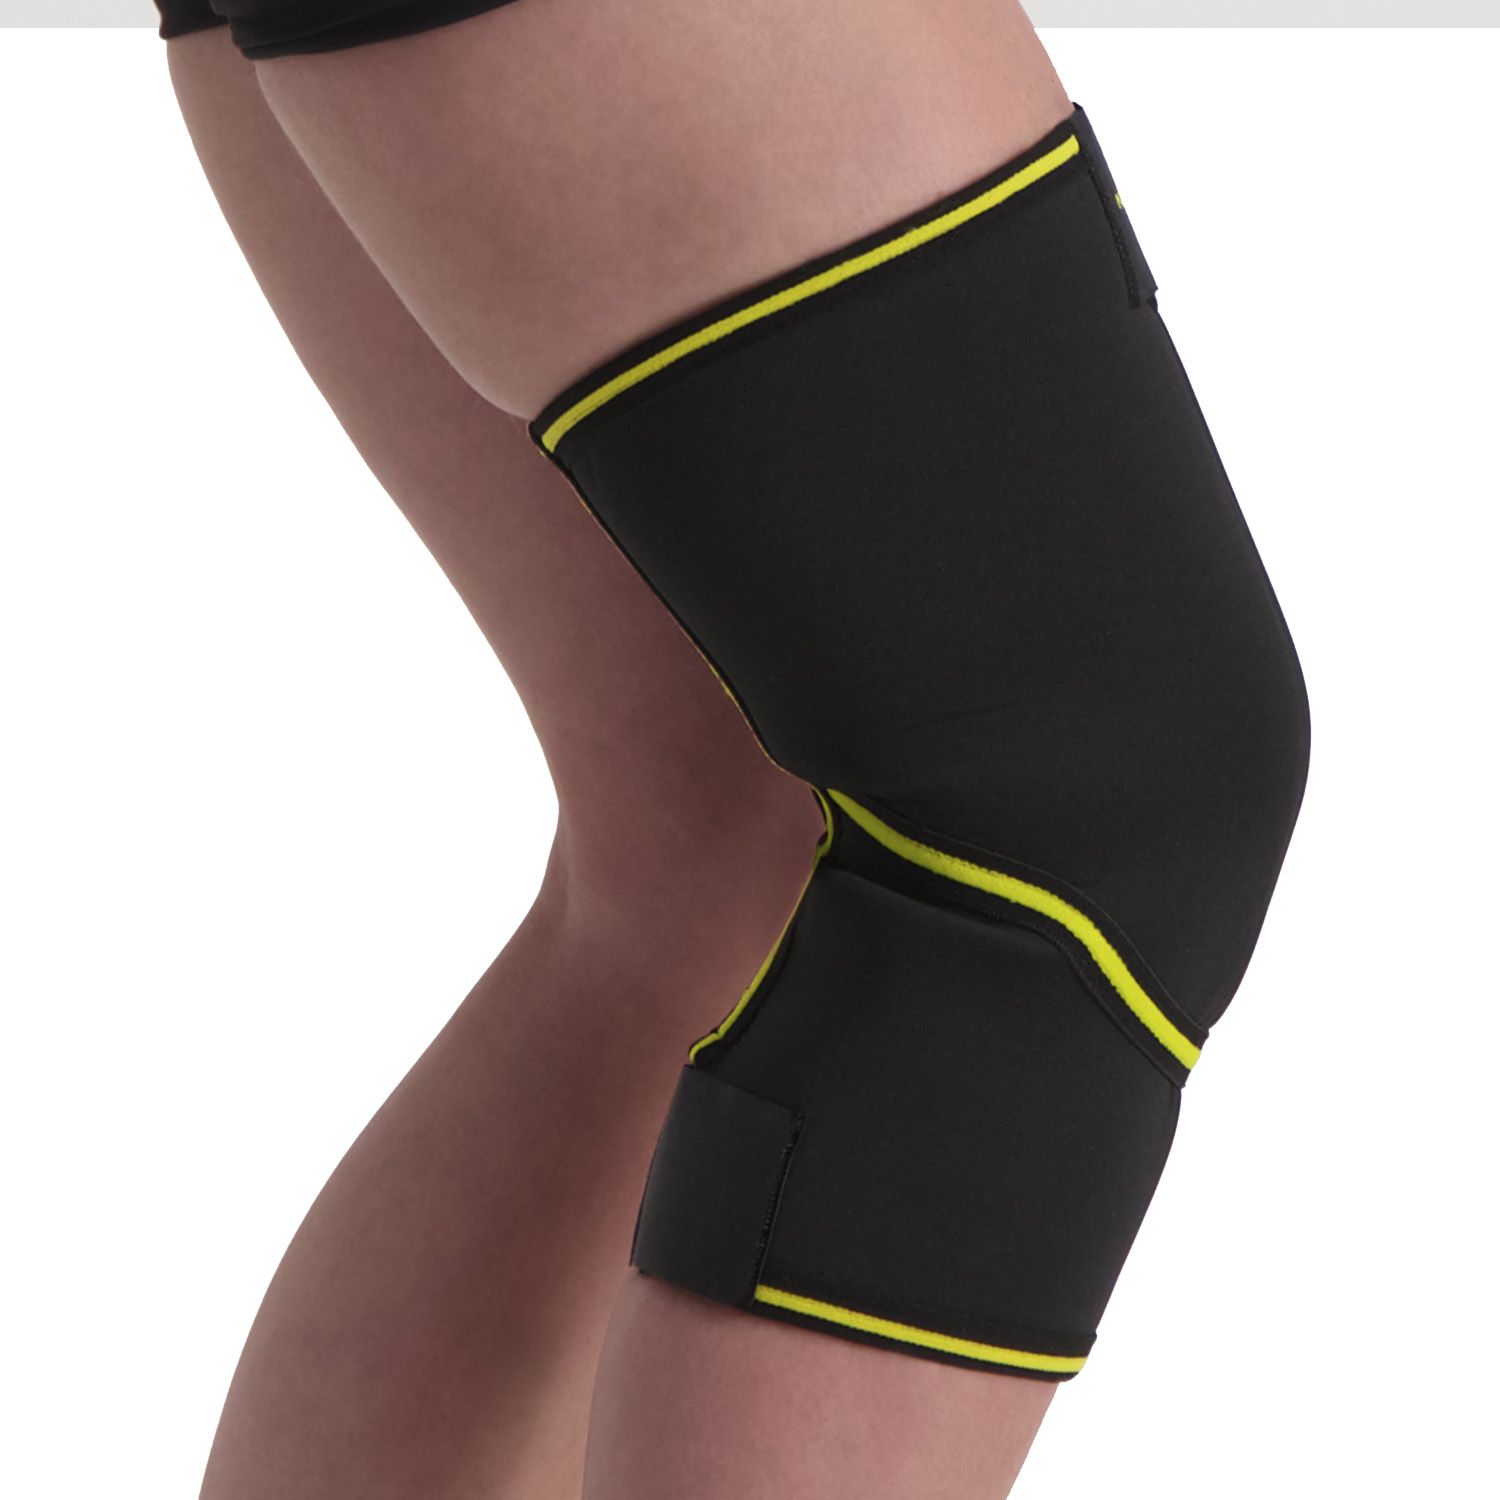 novamed closed patella knee support side view